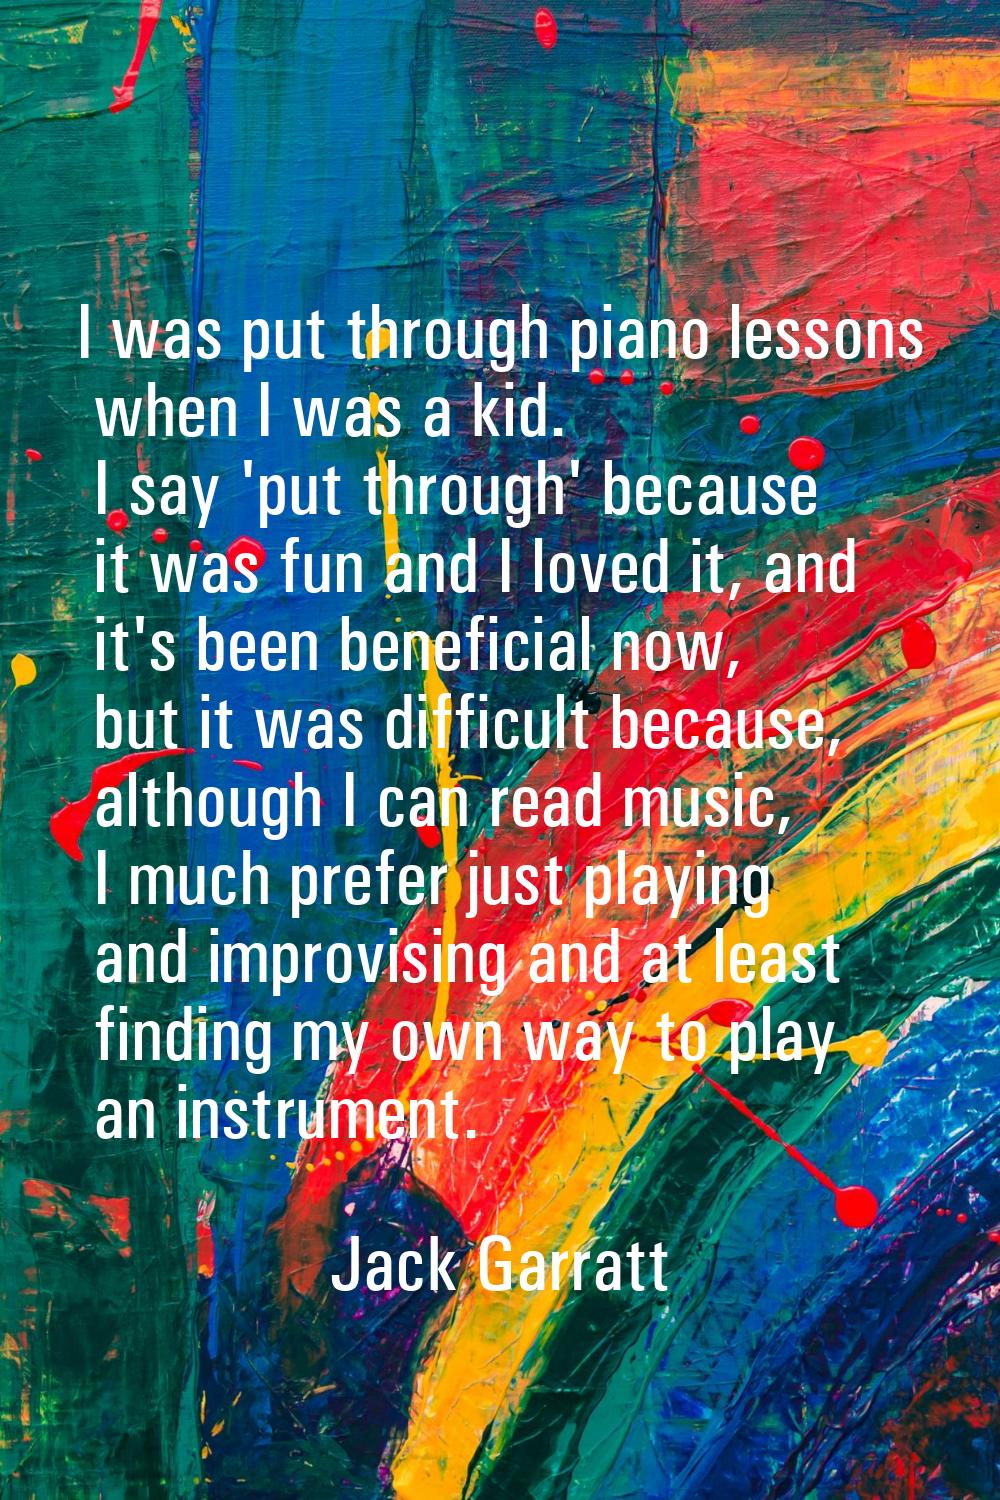 I was put through piano lessons when I was a kid. I say 'put through' because it was fun and I love